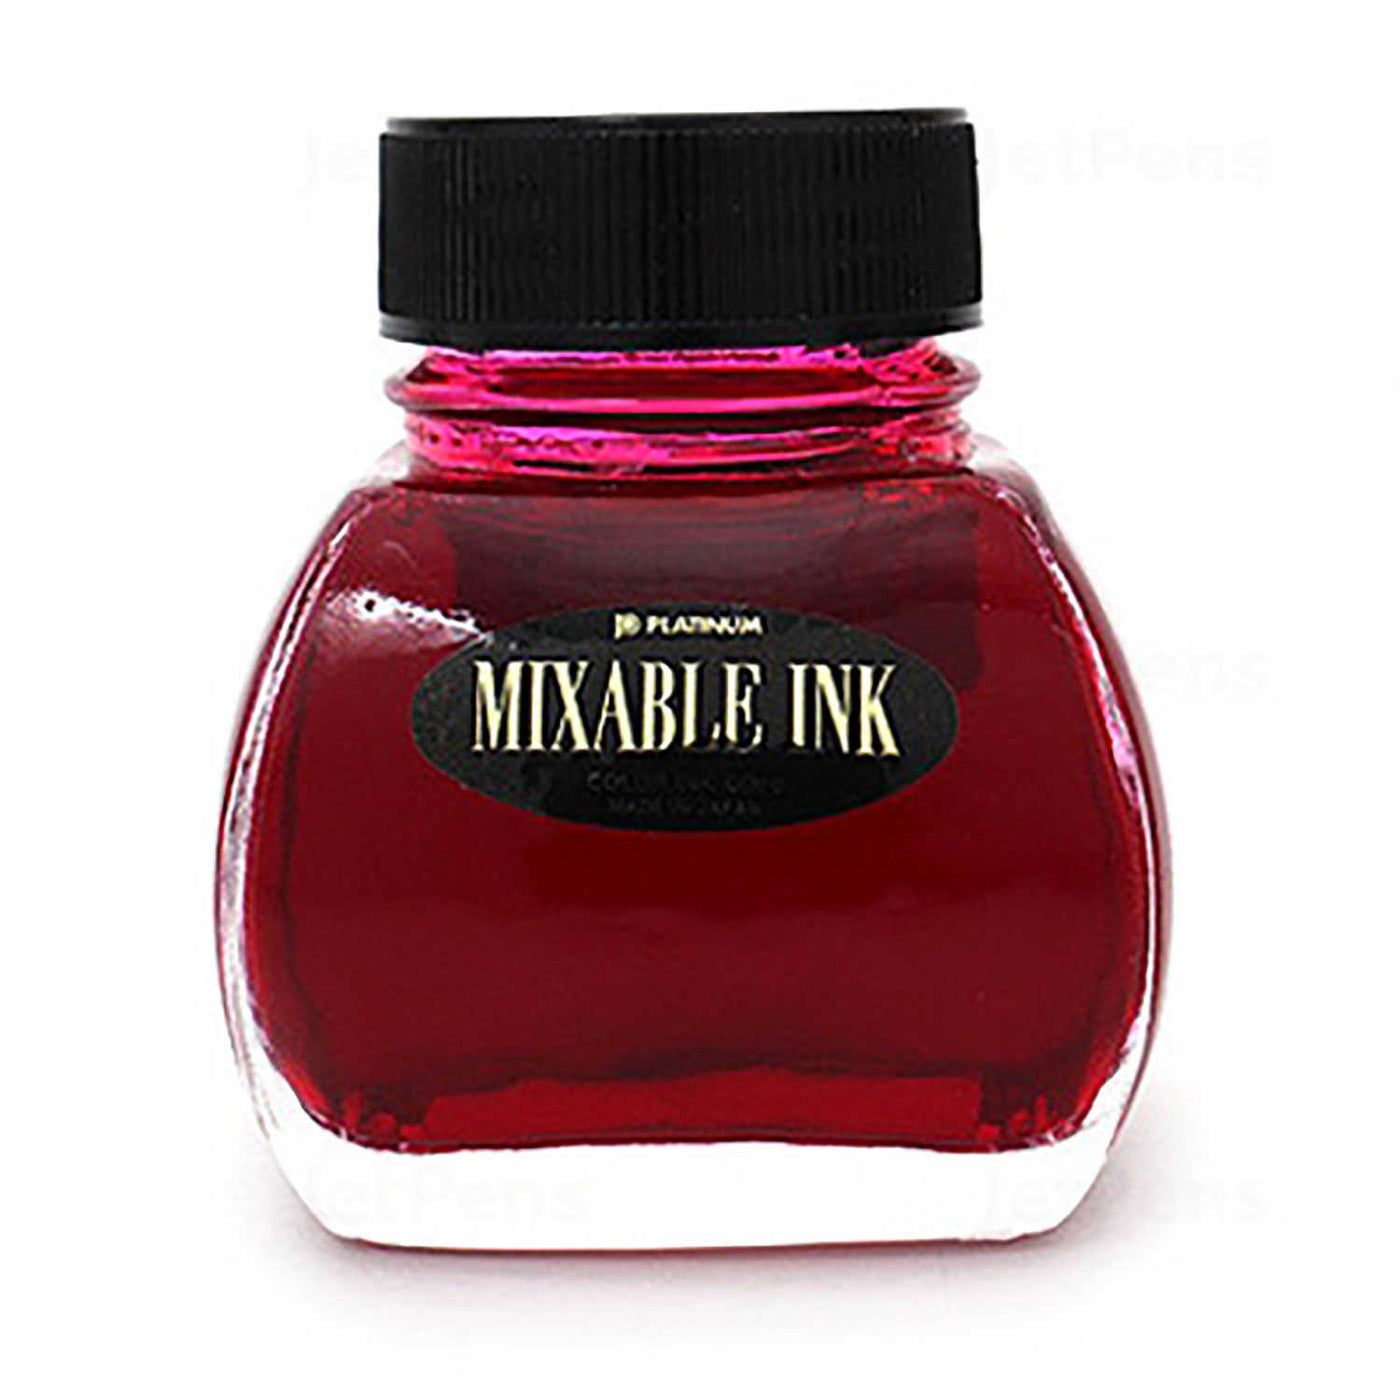 Platinum Mixable Cyclamen Pink Ink Bottle Pink - 60ml